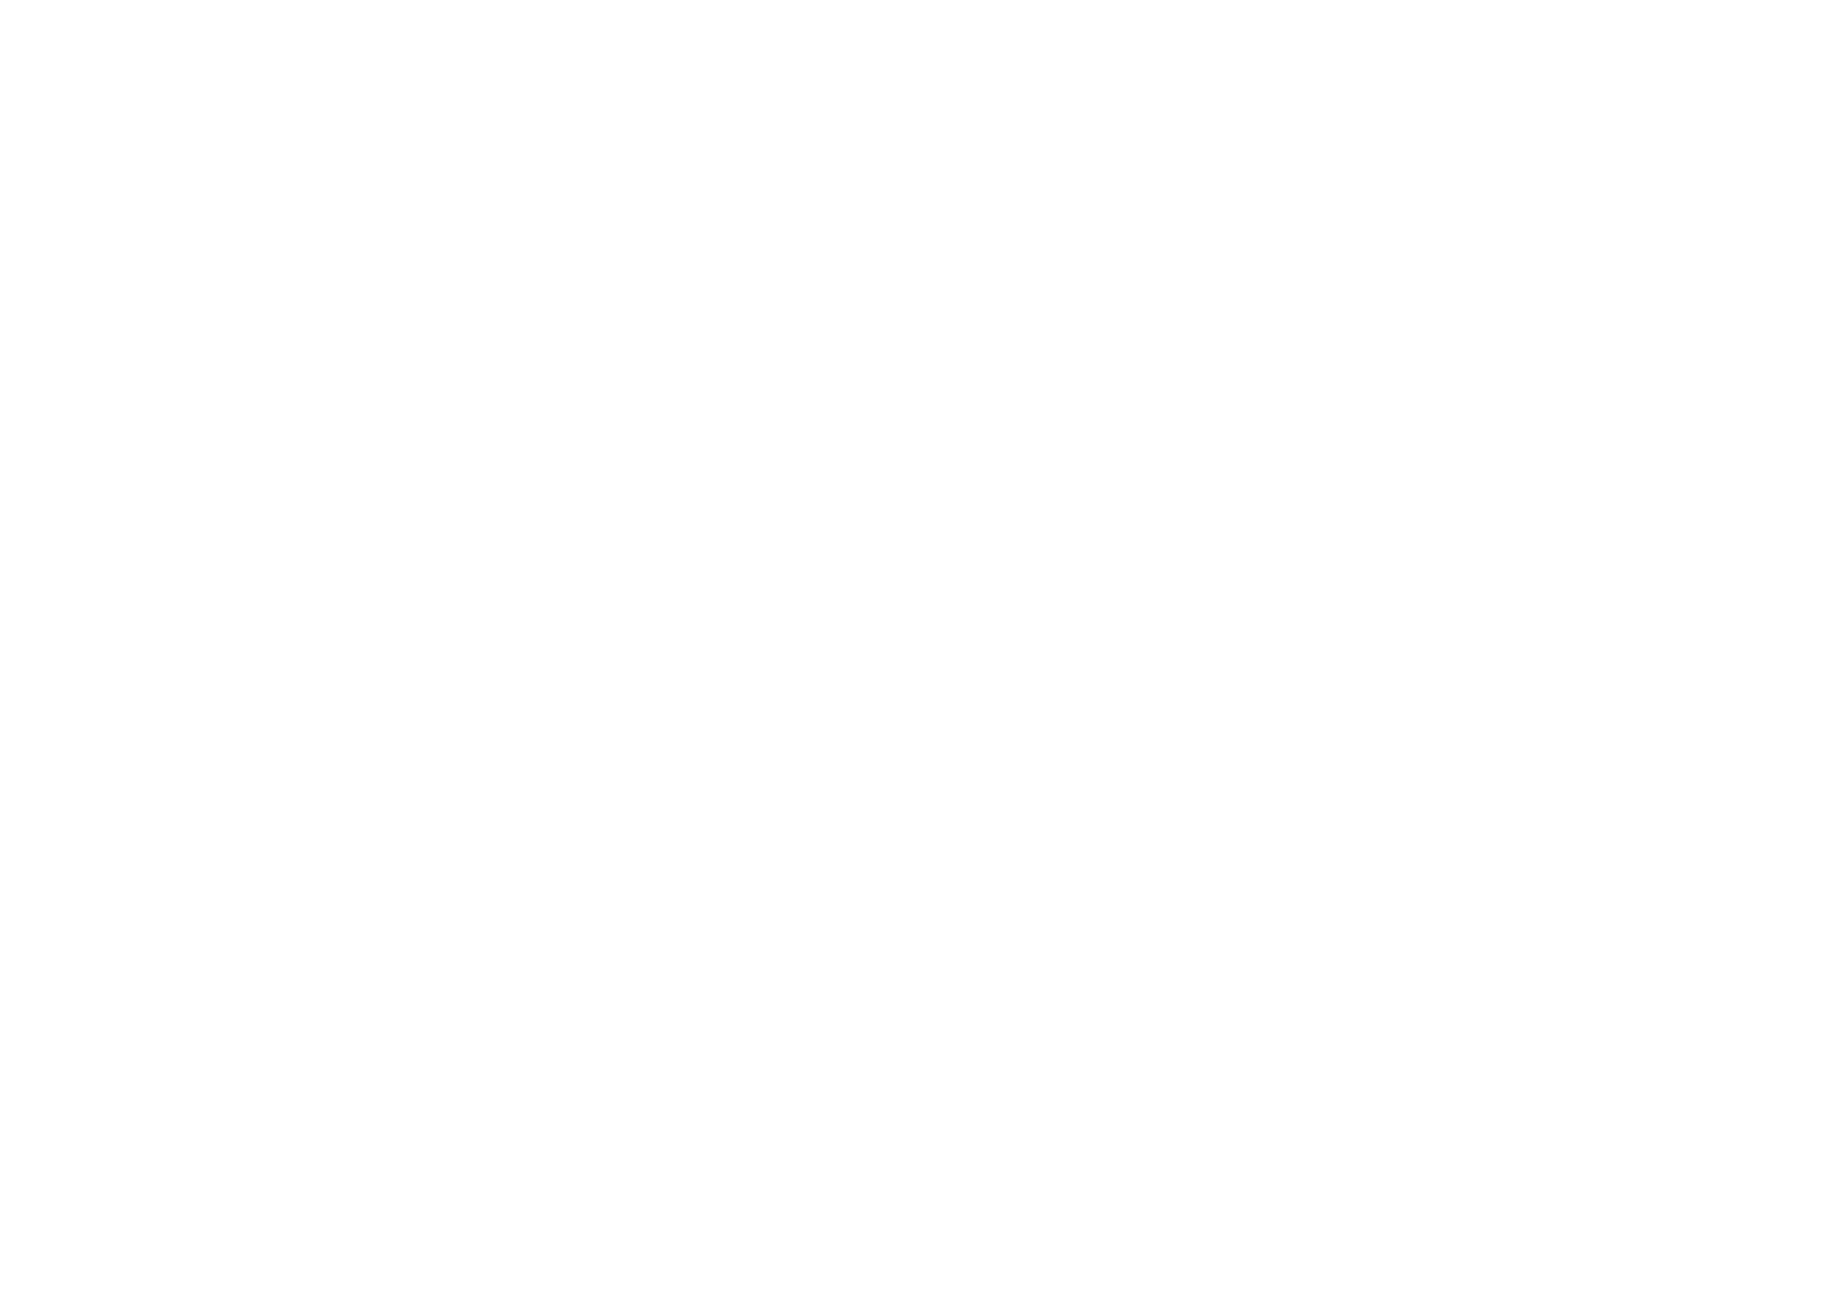 official ITRA NATIONAL LEAGUE logo